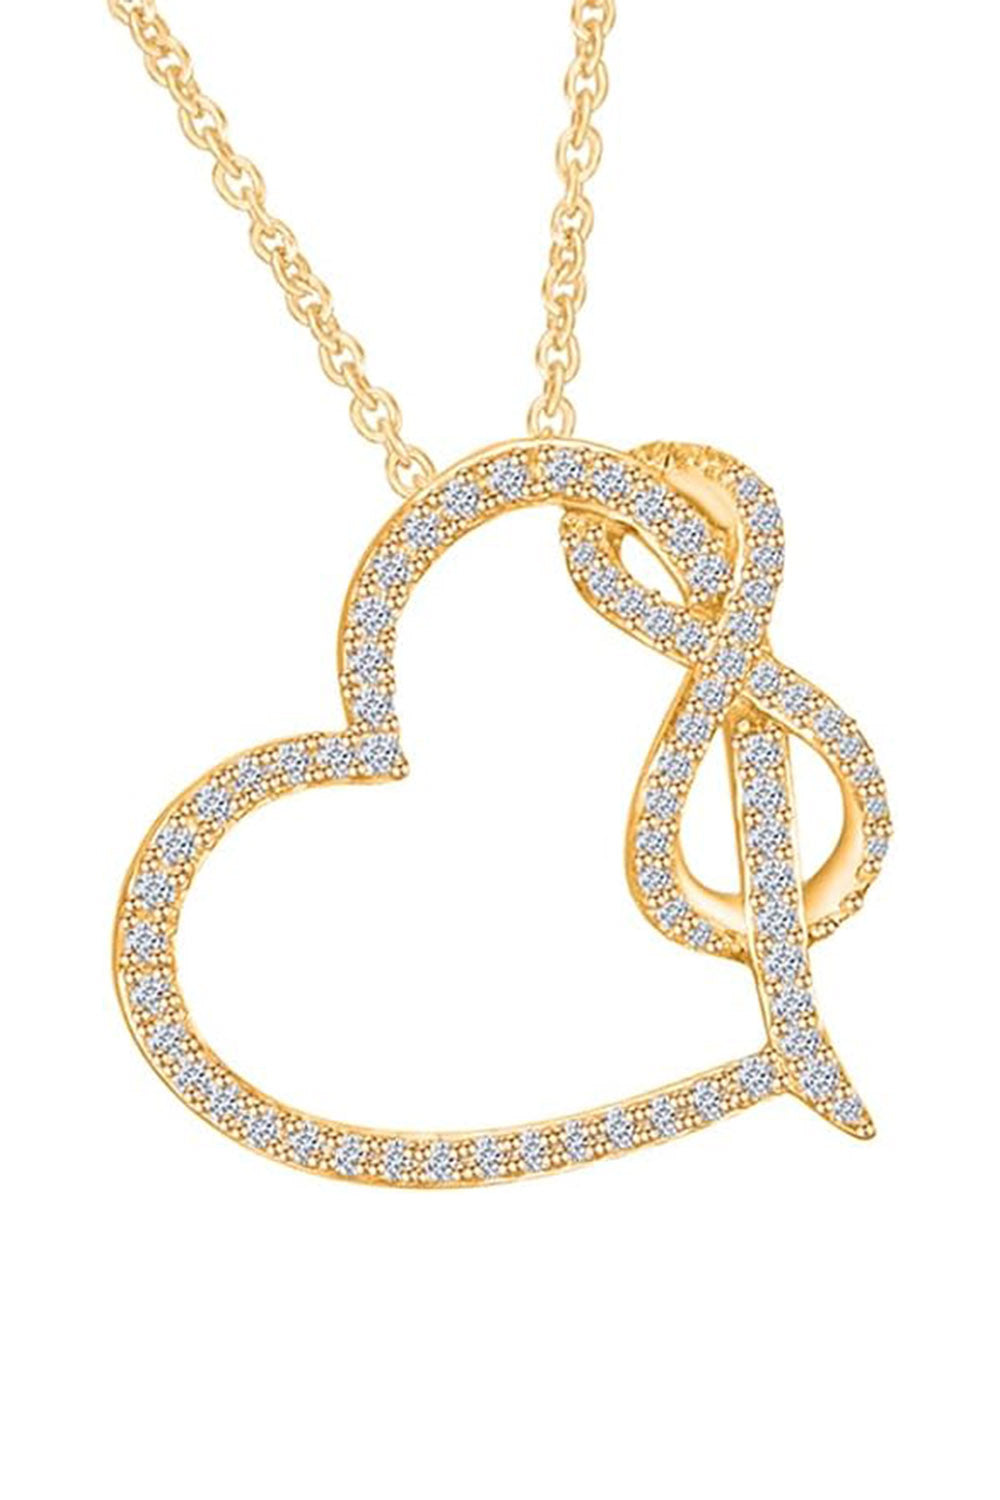 Yellow Gold Color 1/3 Carat Moissanite Heart Infinity Pendant Necklace